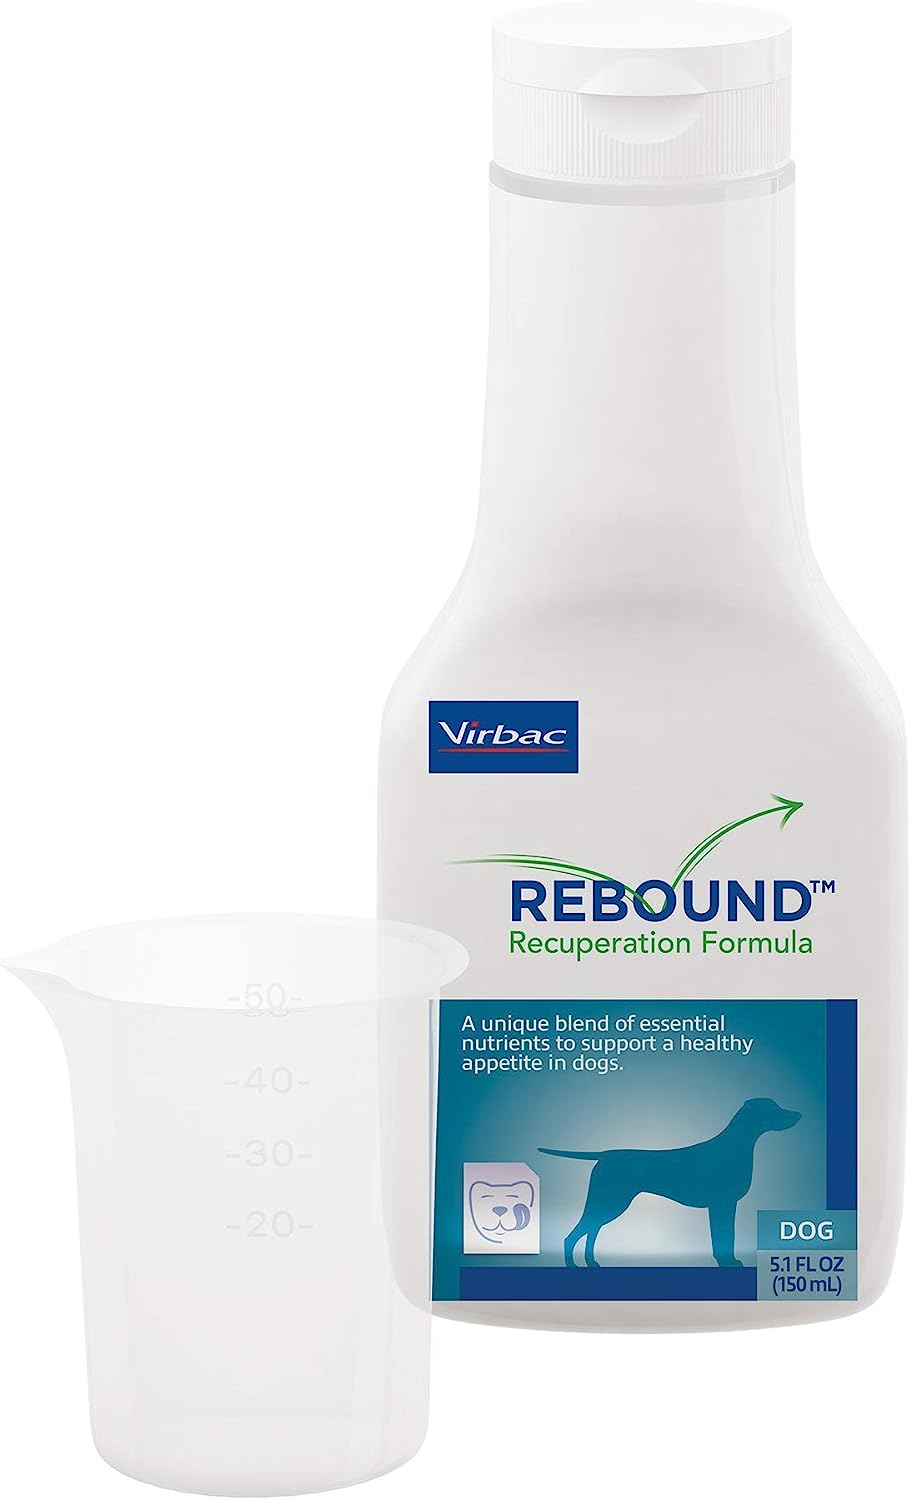 Virbac Rebound Recuperation Formula for Dogs, Clear